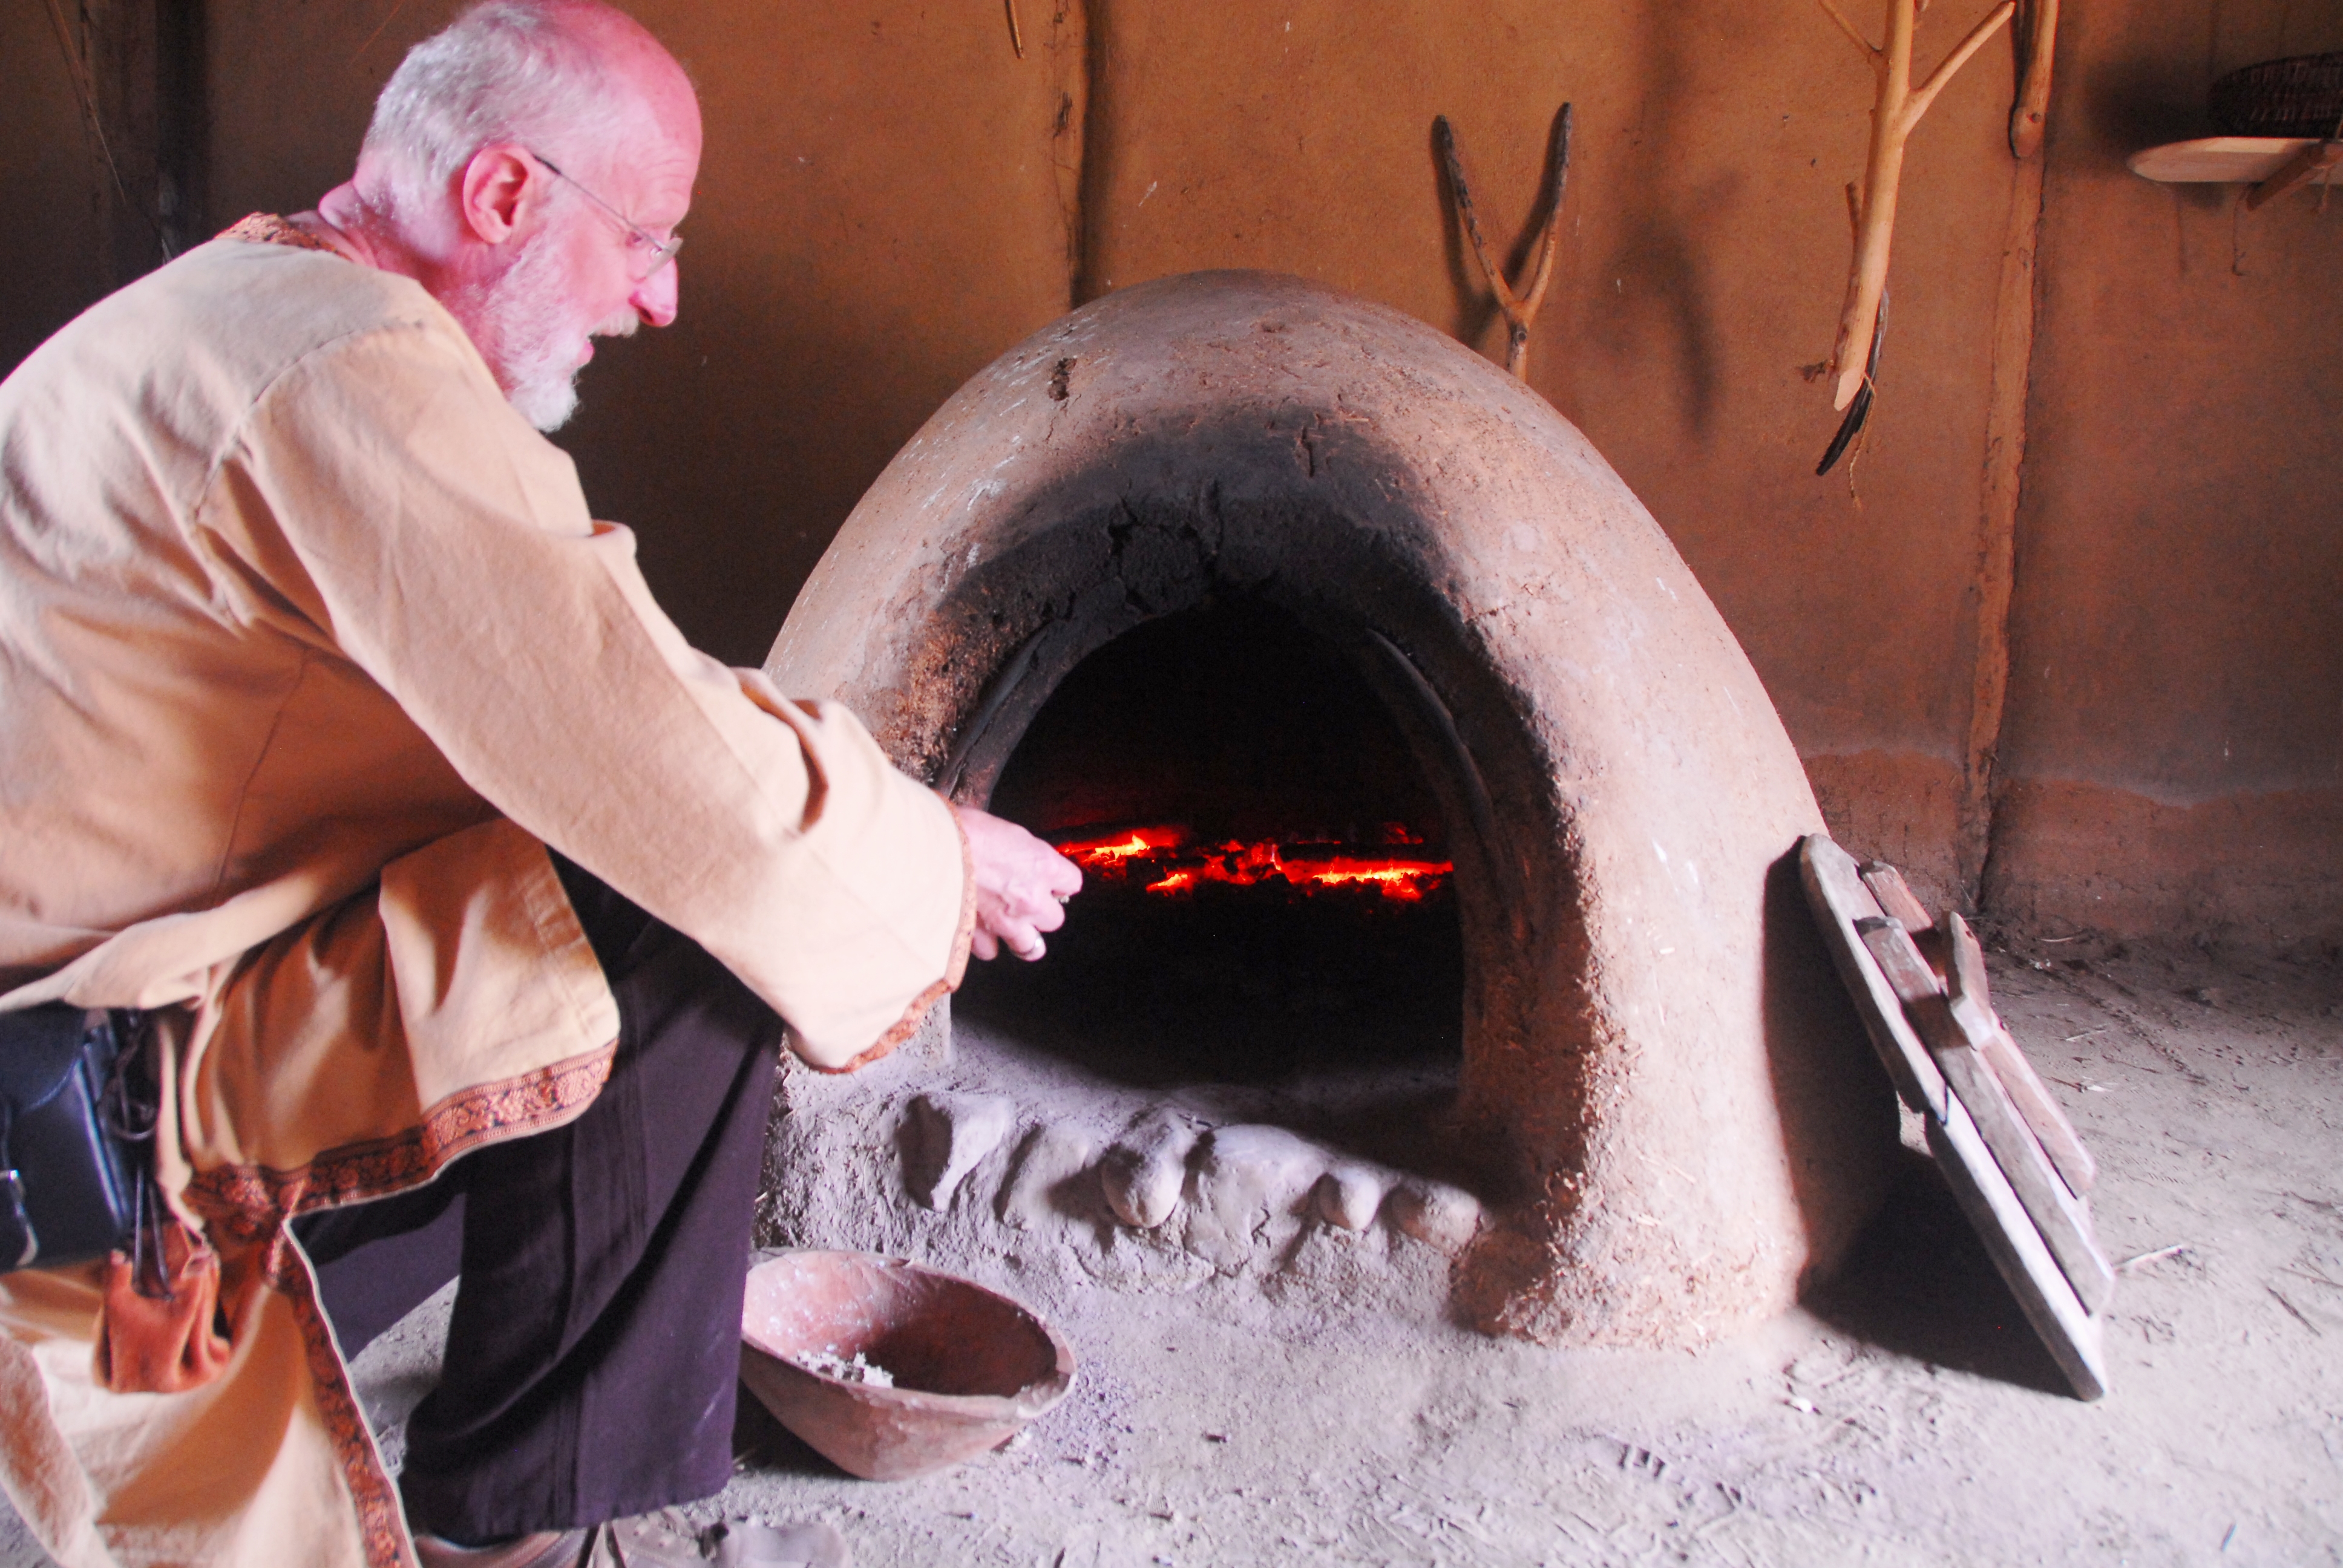 Fire Beneath the Dome: Project to Evaluate the Efficiency of Clay Ovens in  the Viking Museum Haithabu